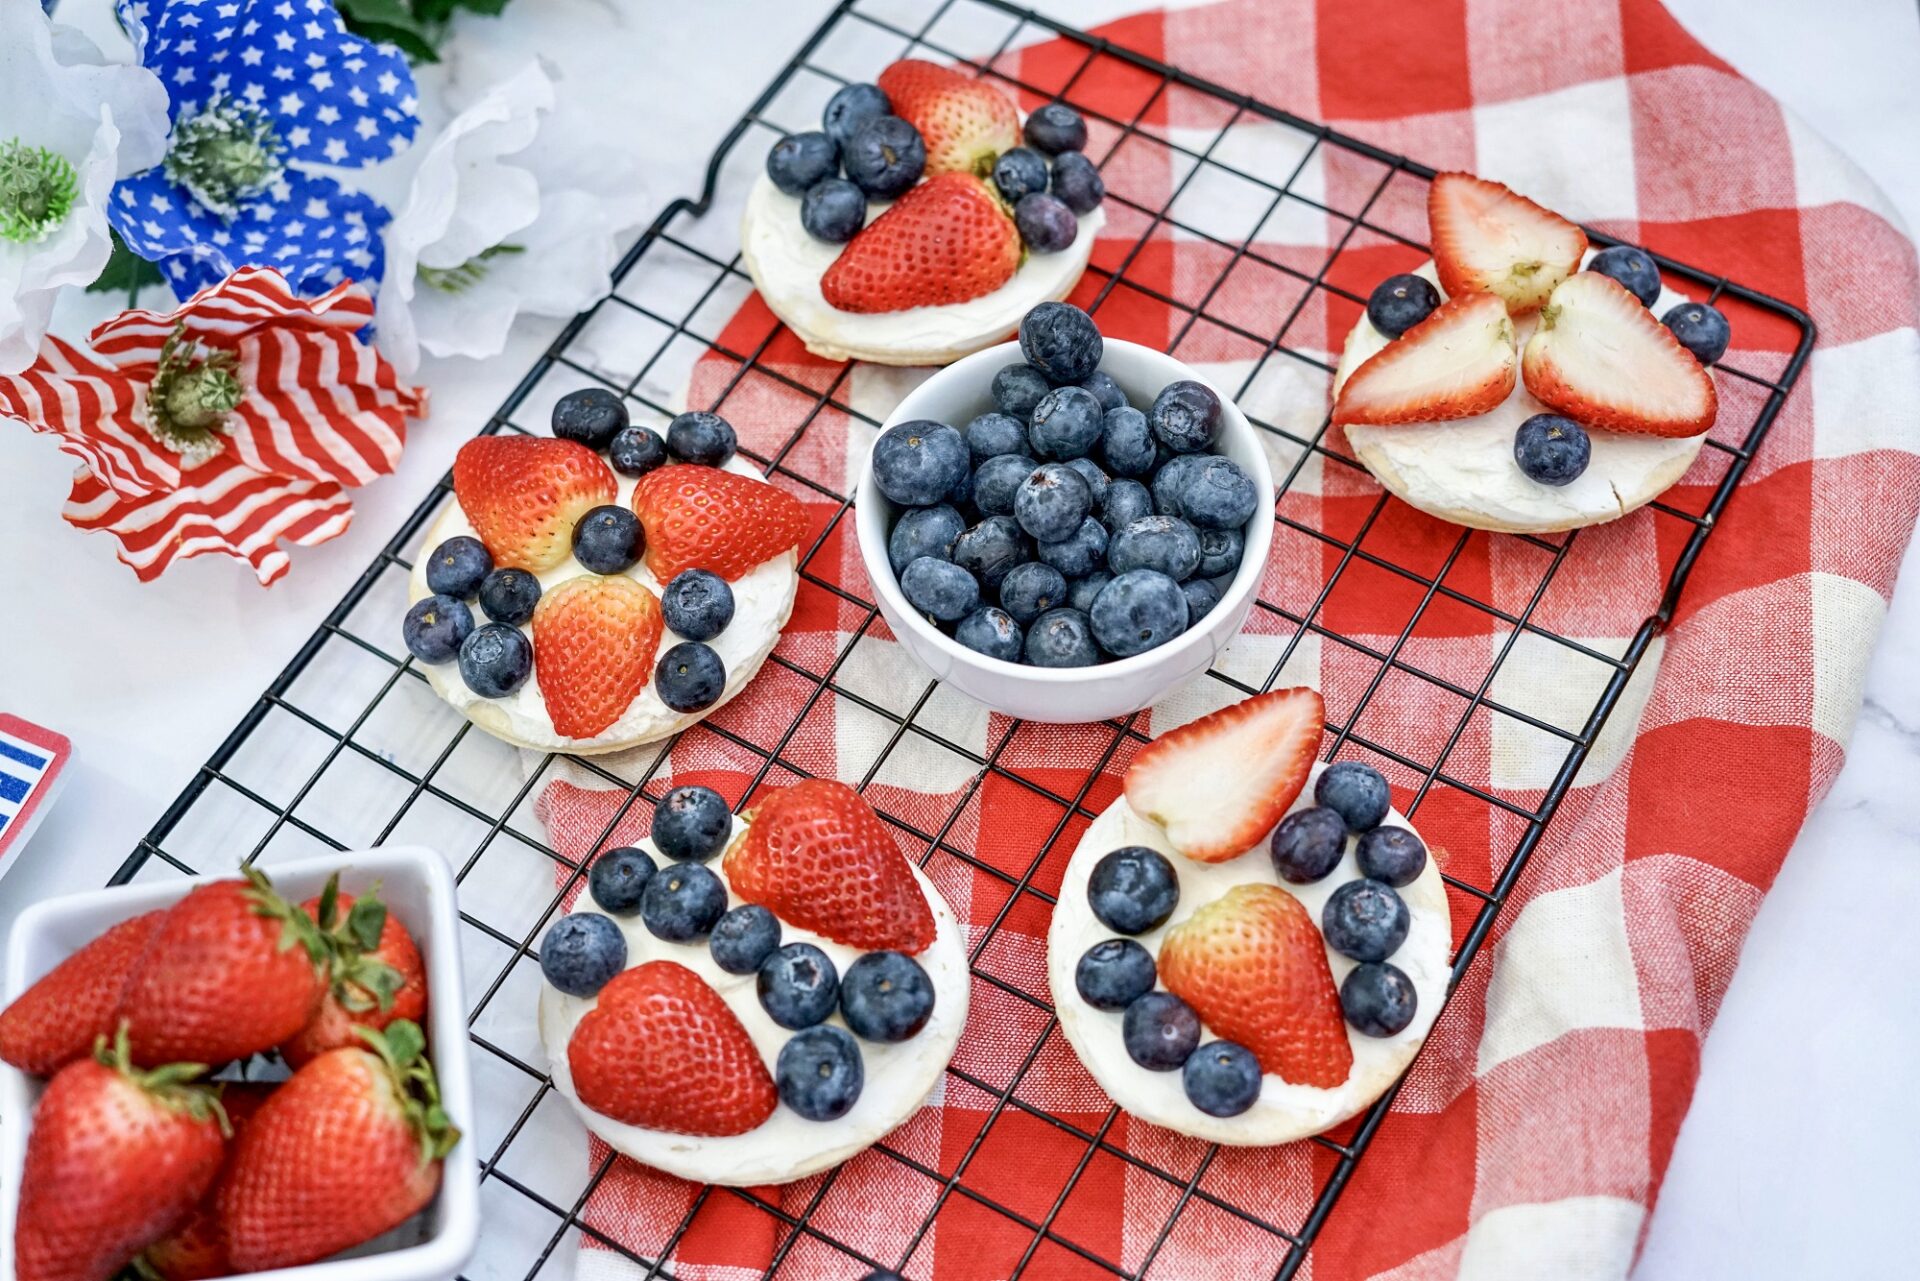 Mini Fruit Pizza with strawberries and blueberries on a cooling rack.